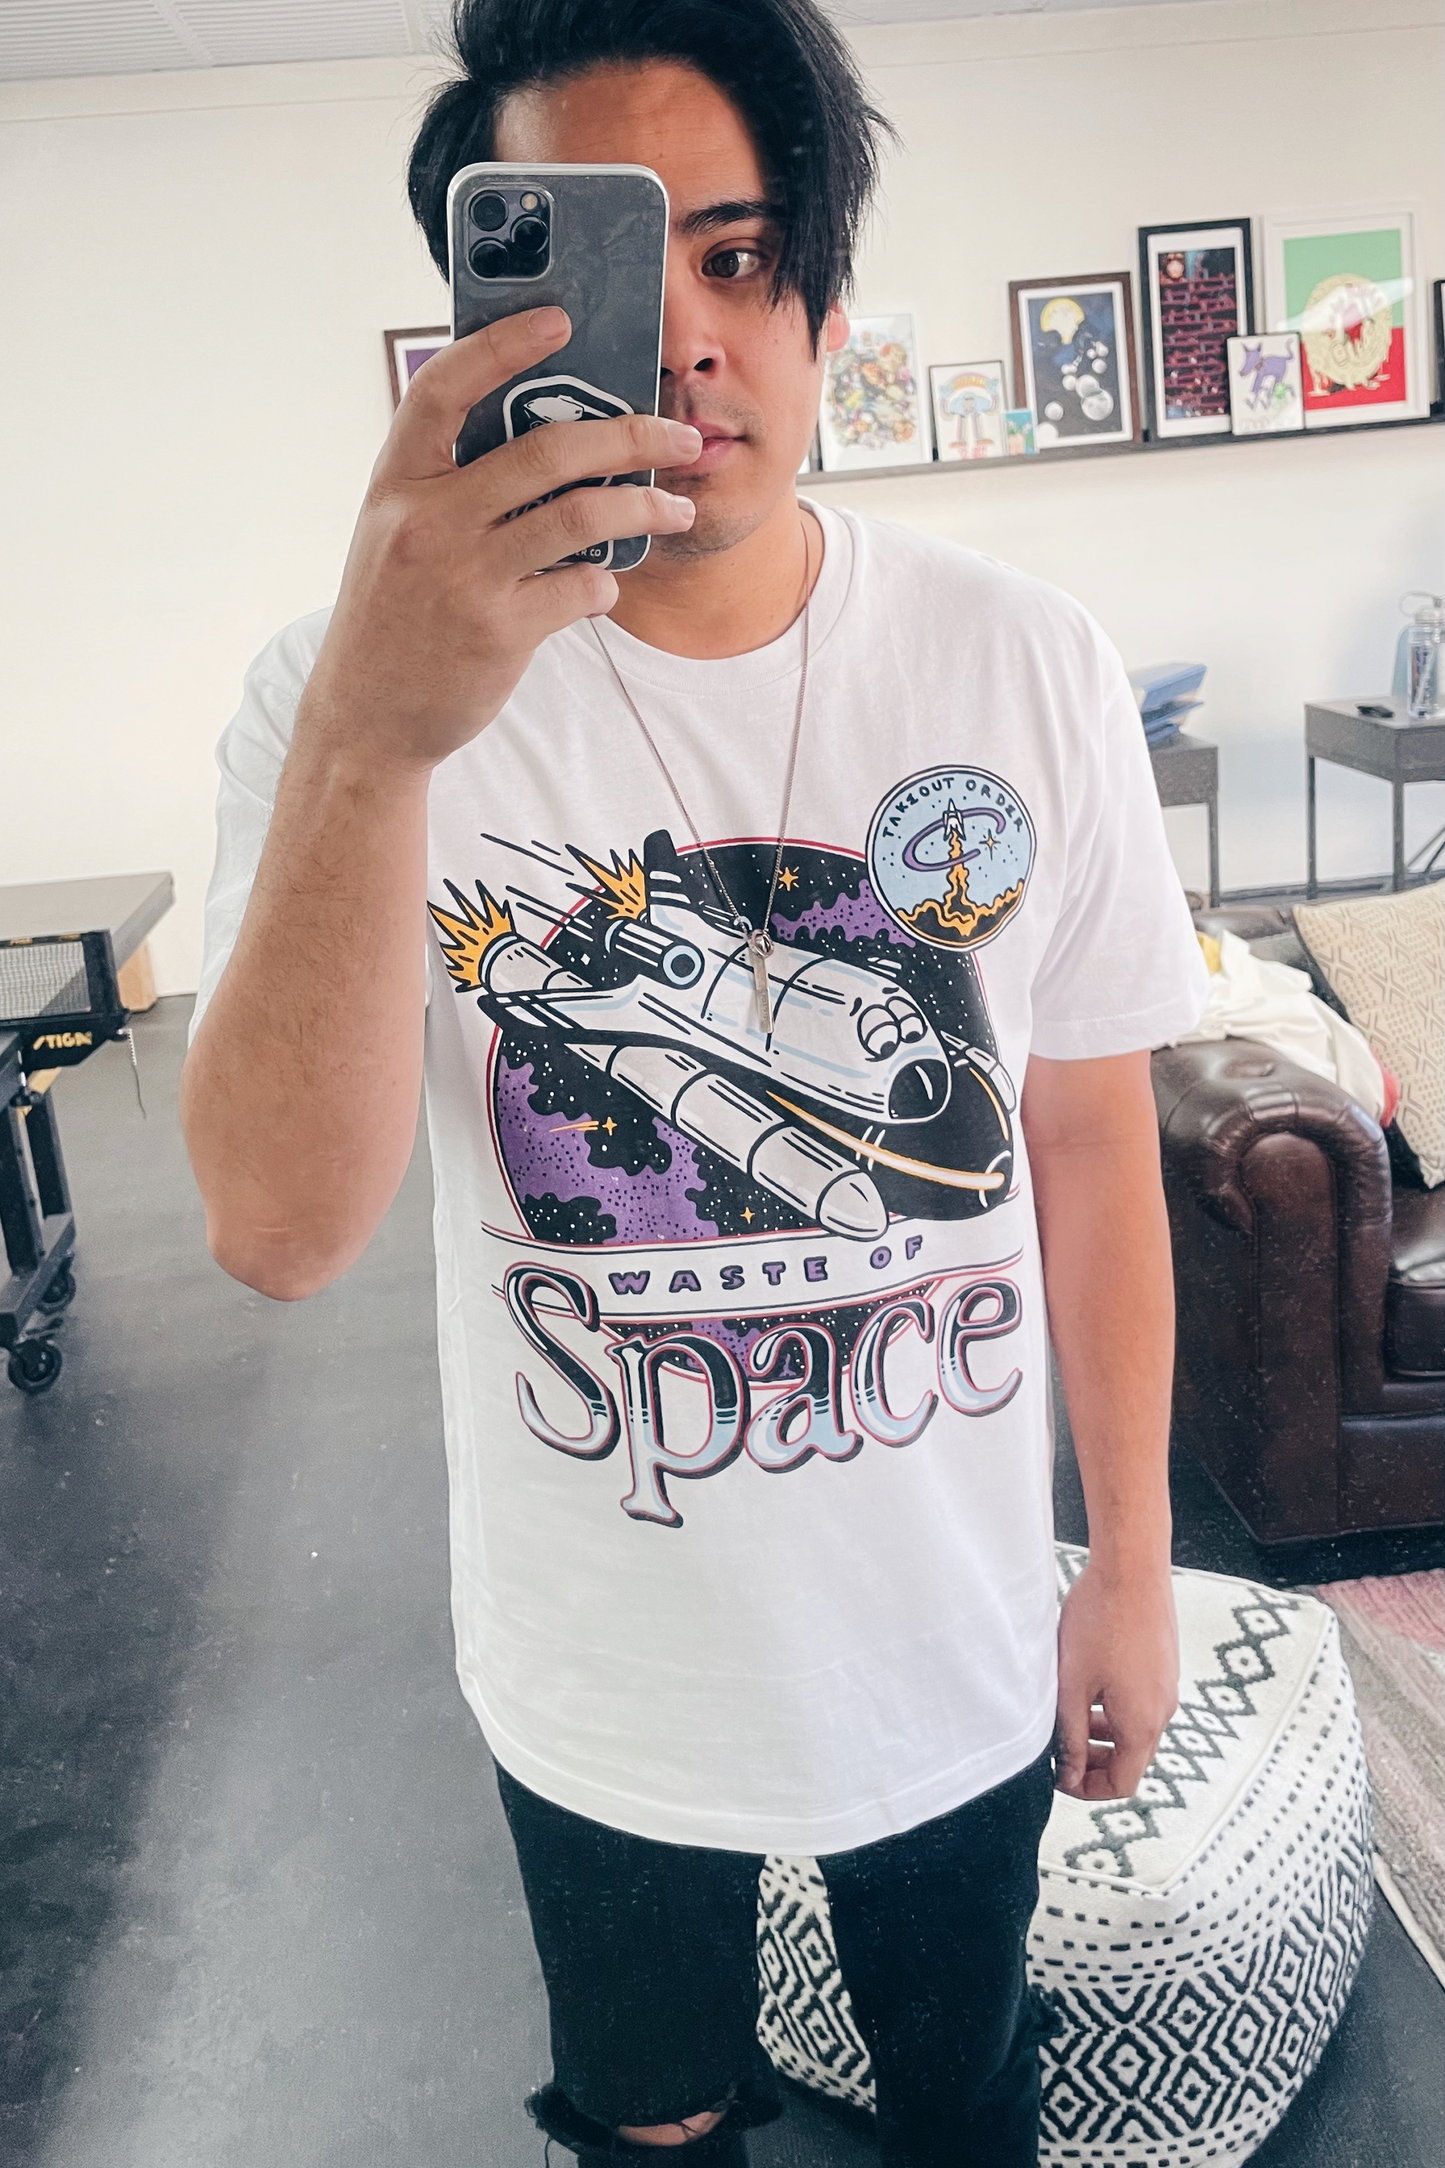 Waste of Space T-shirt